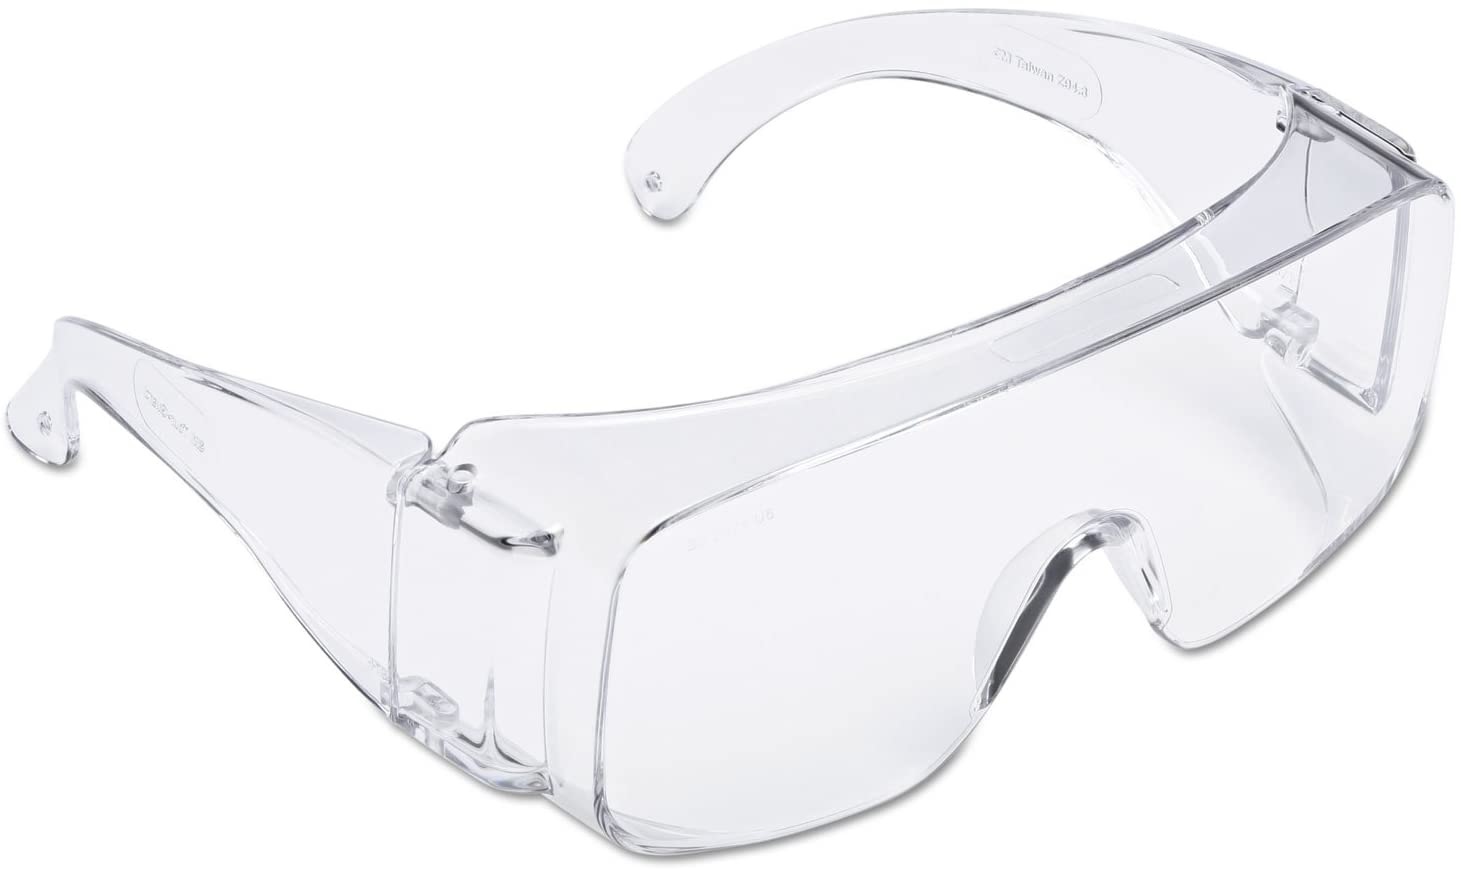 SAFETY GLASSES, TOUR- GUARD, CLEAR EYEWEAR - Clear Lens